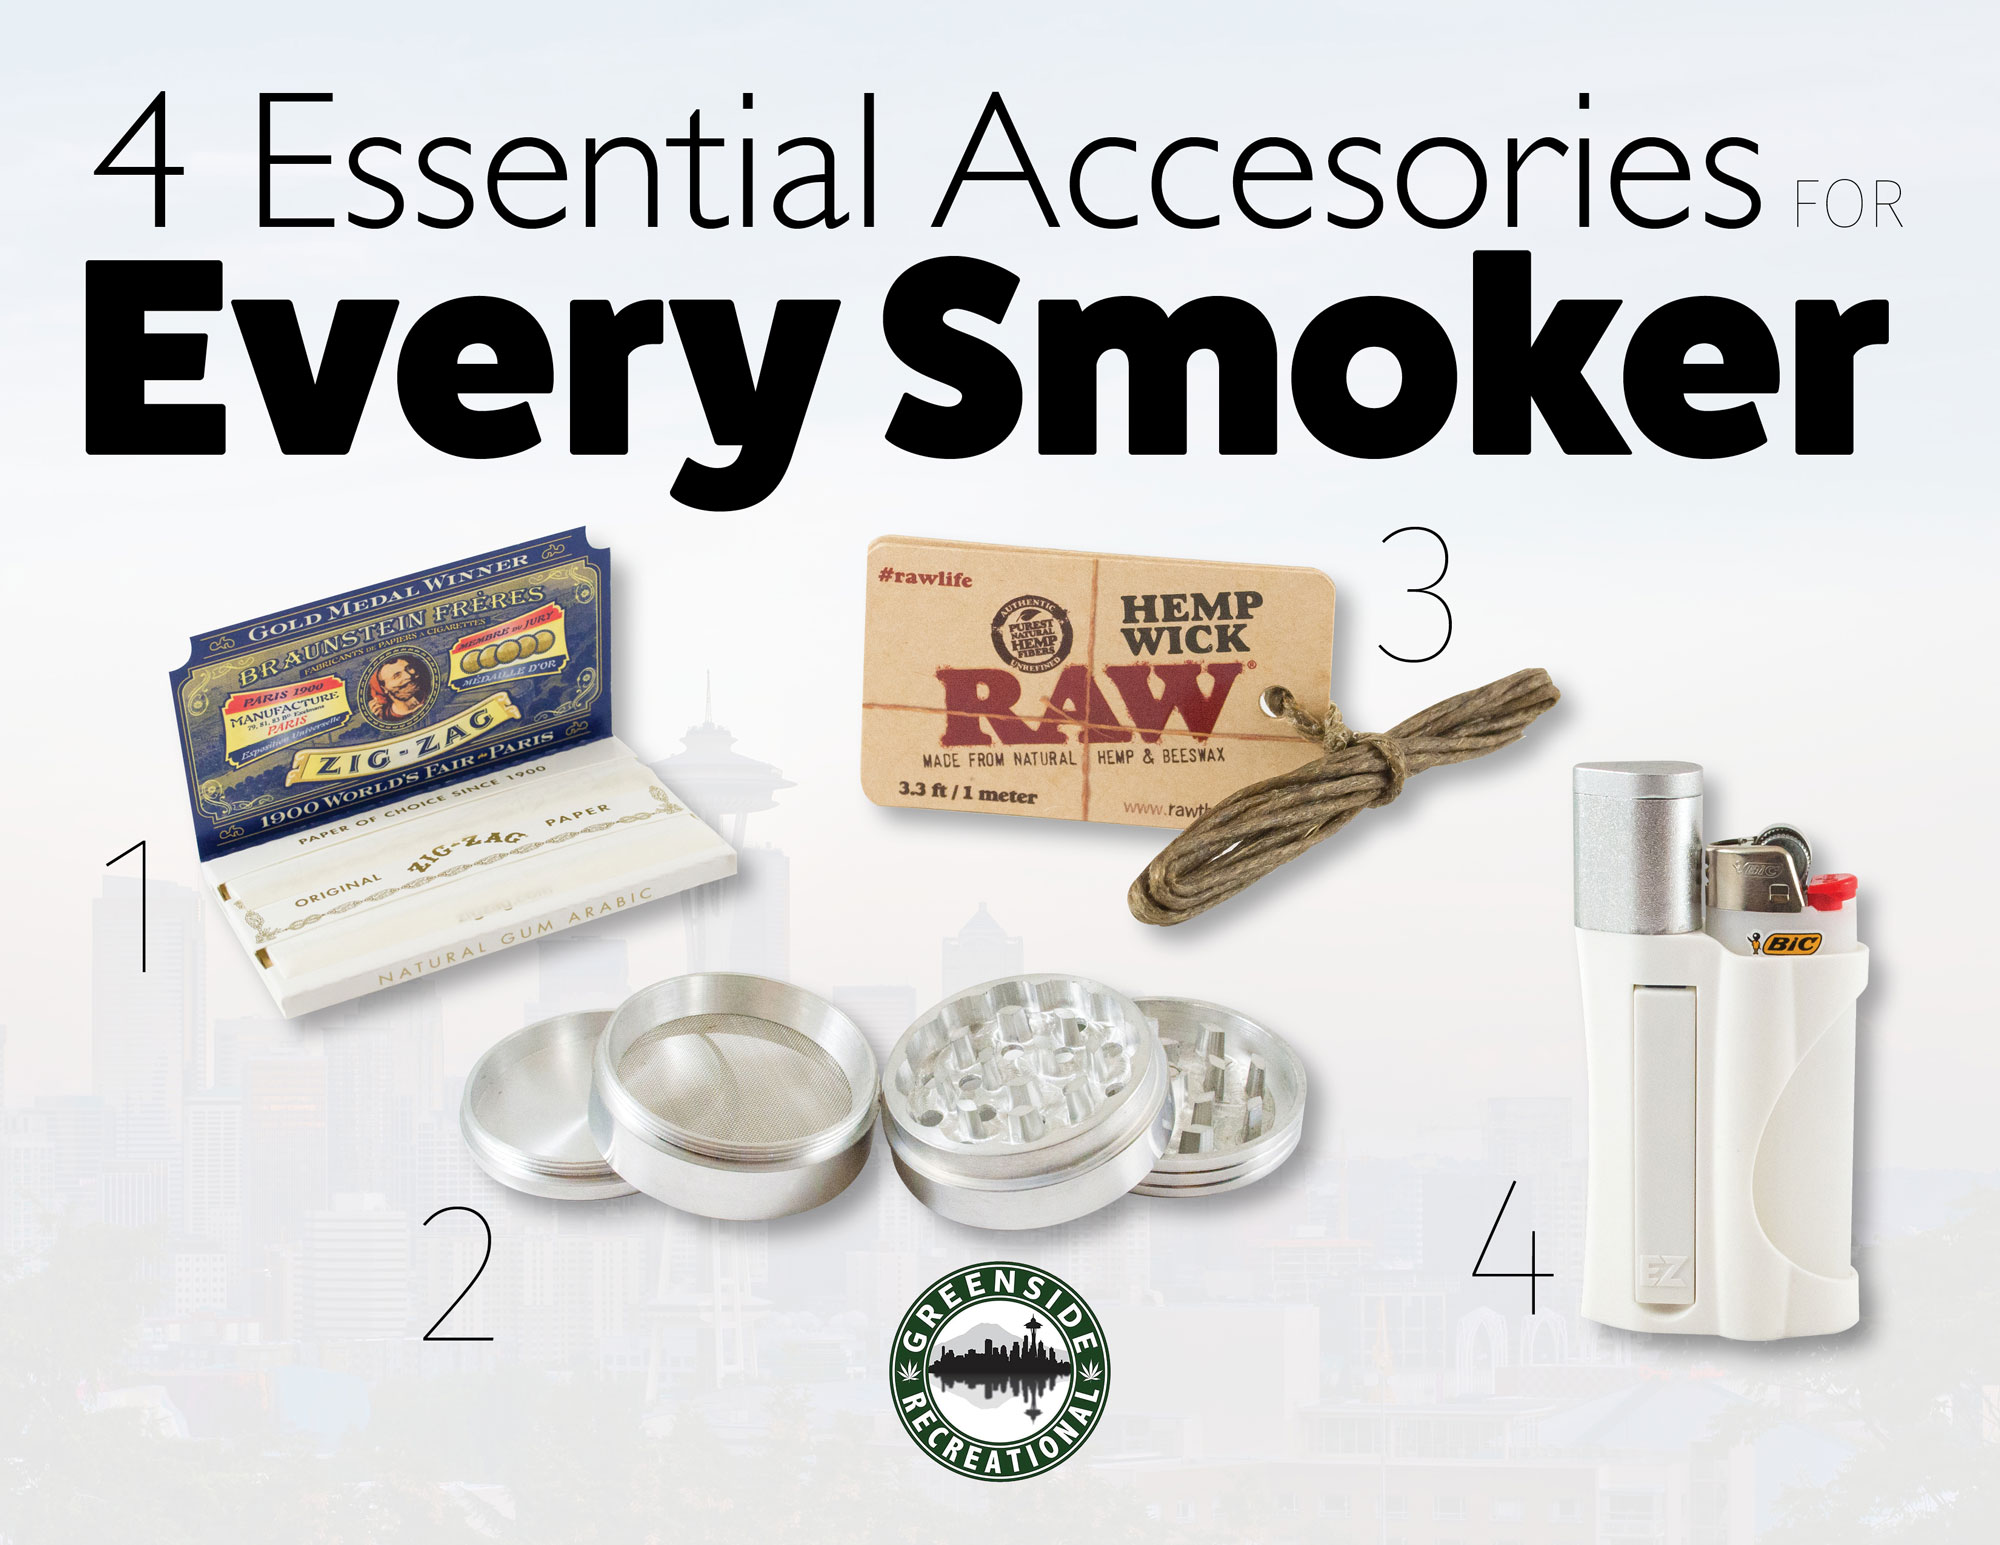 6 Essential Cannabis Accessories That are Must Have in A Smoking Box